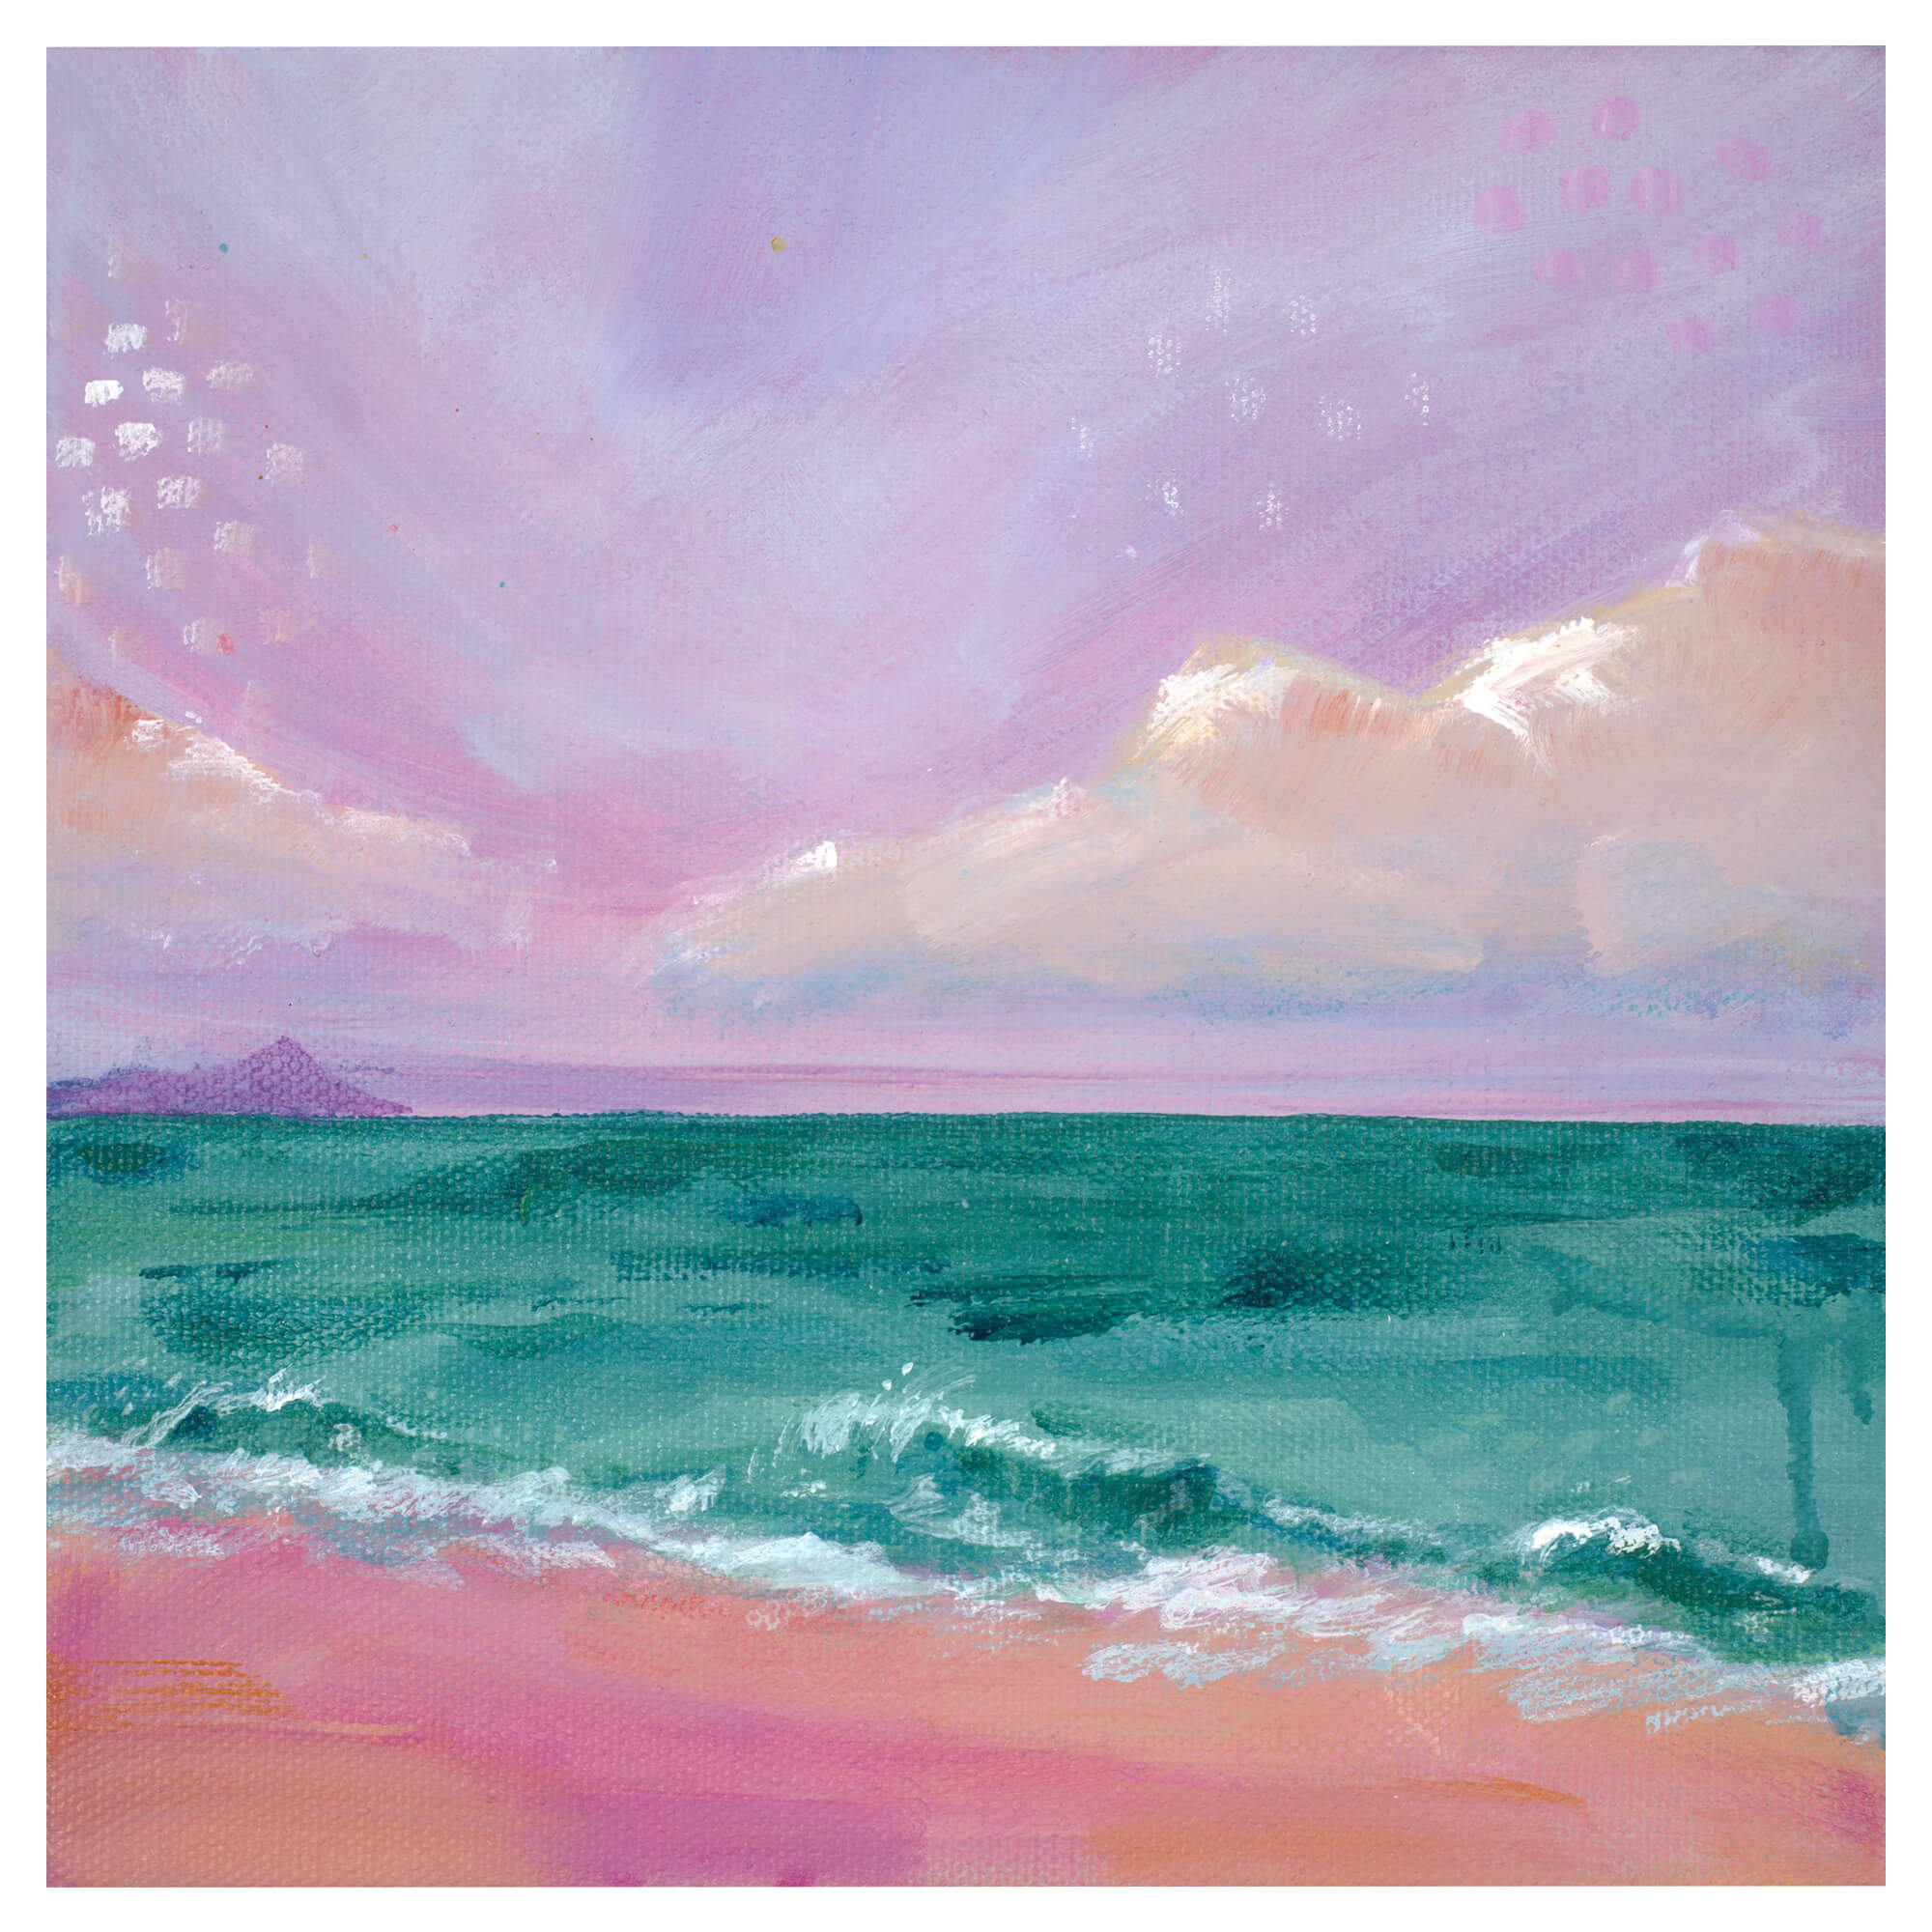 A seascape with light purple sky and pink sand by Hawaii artist Lindsay Wilkins